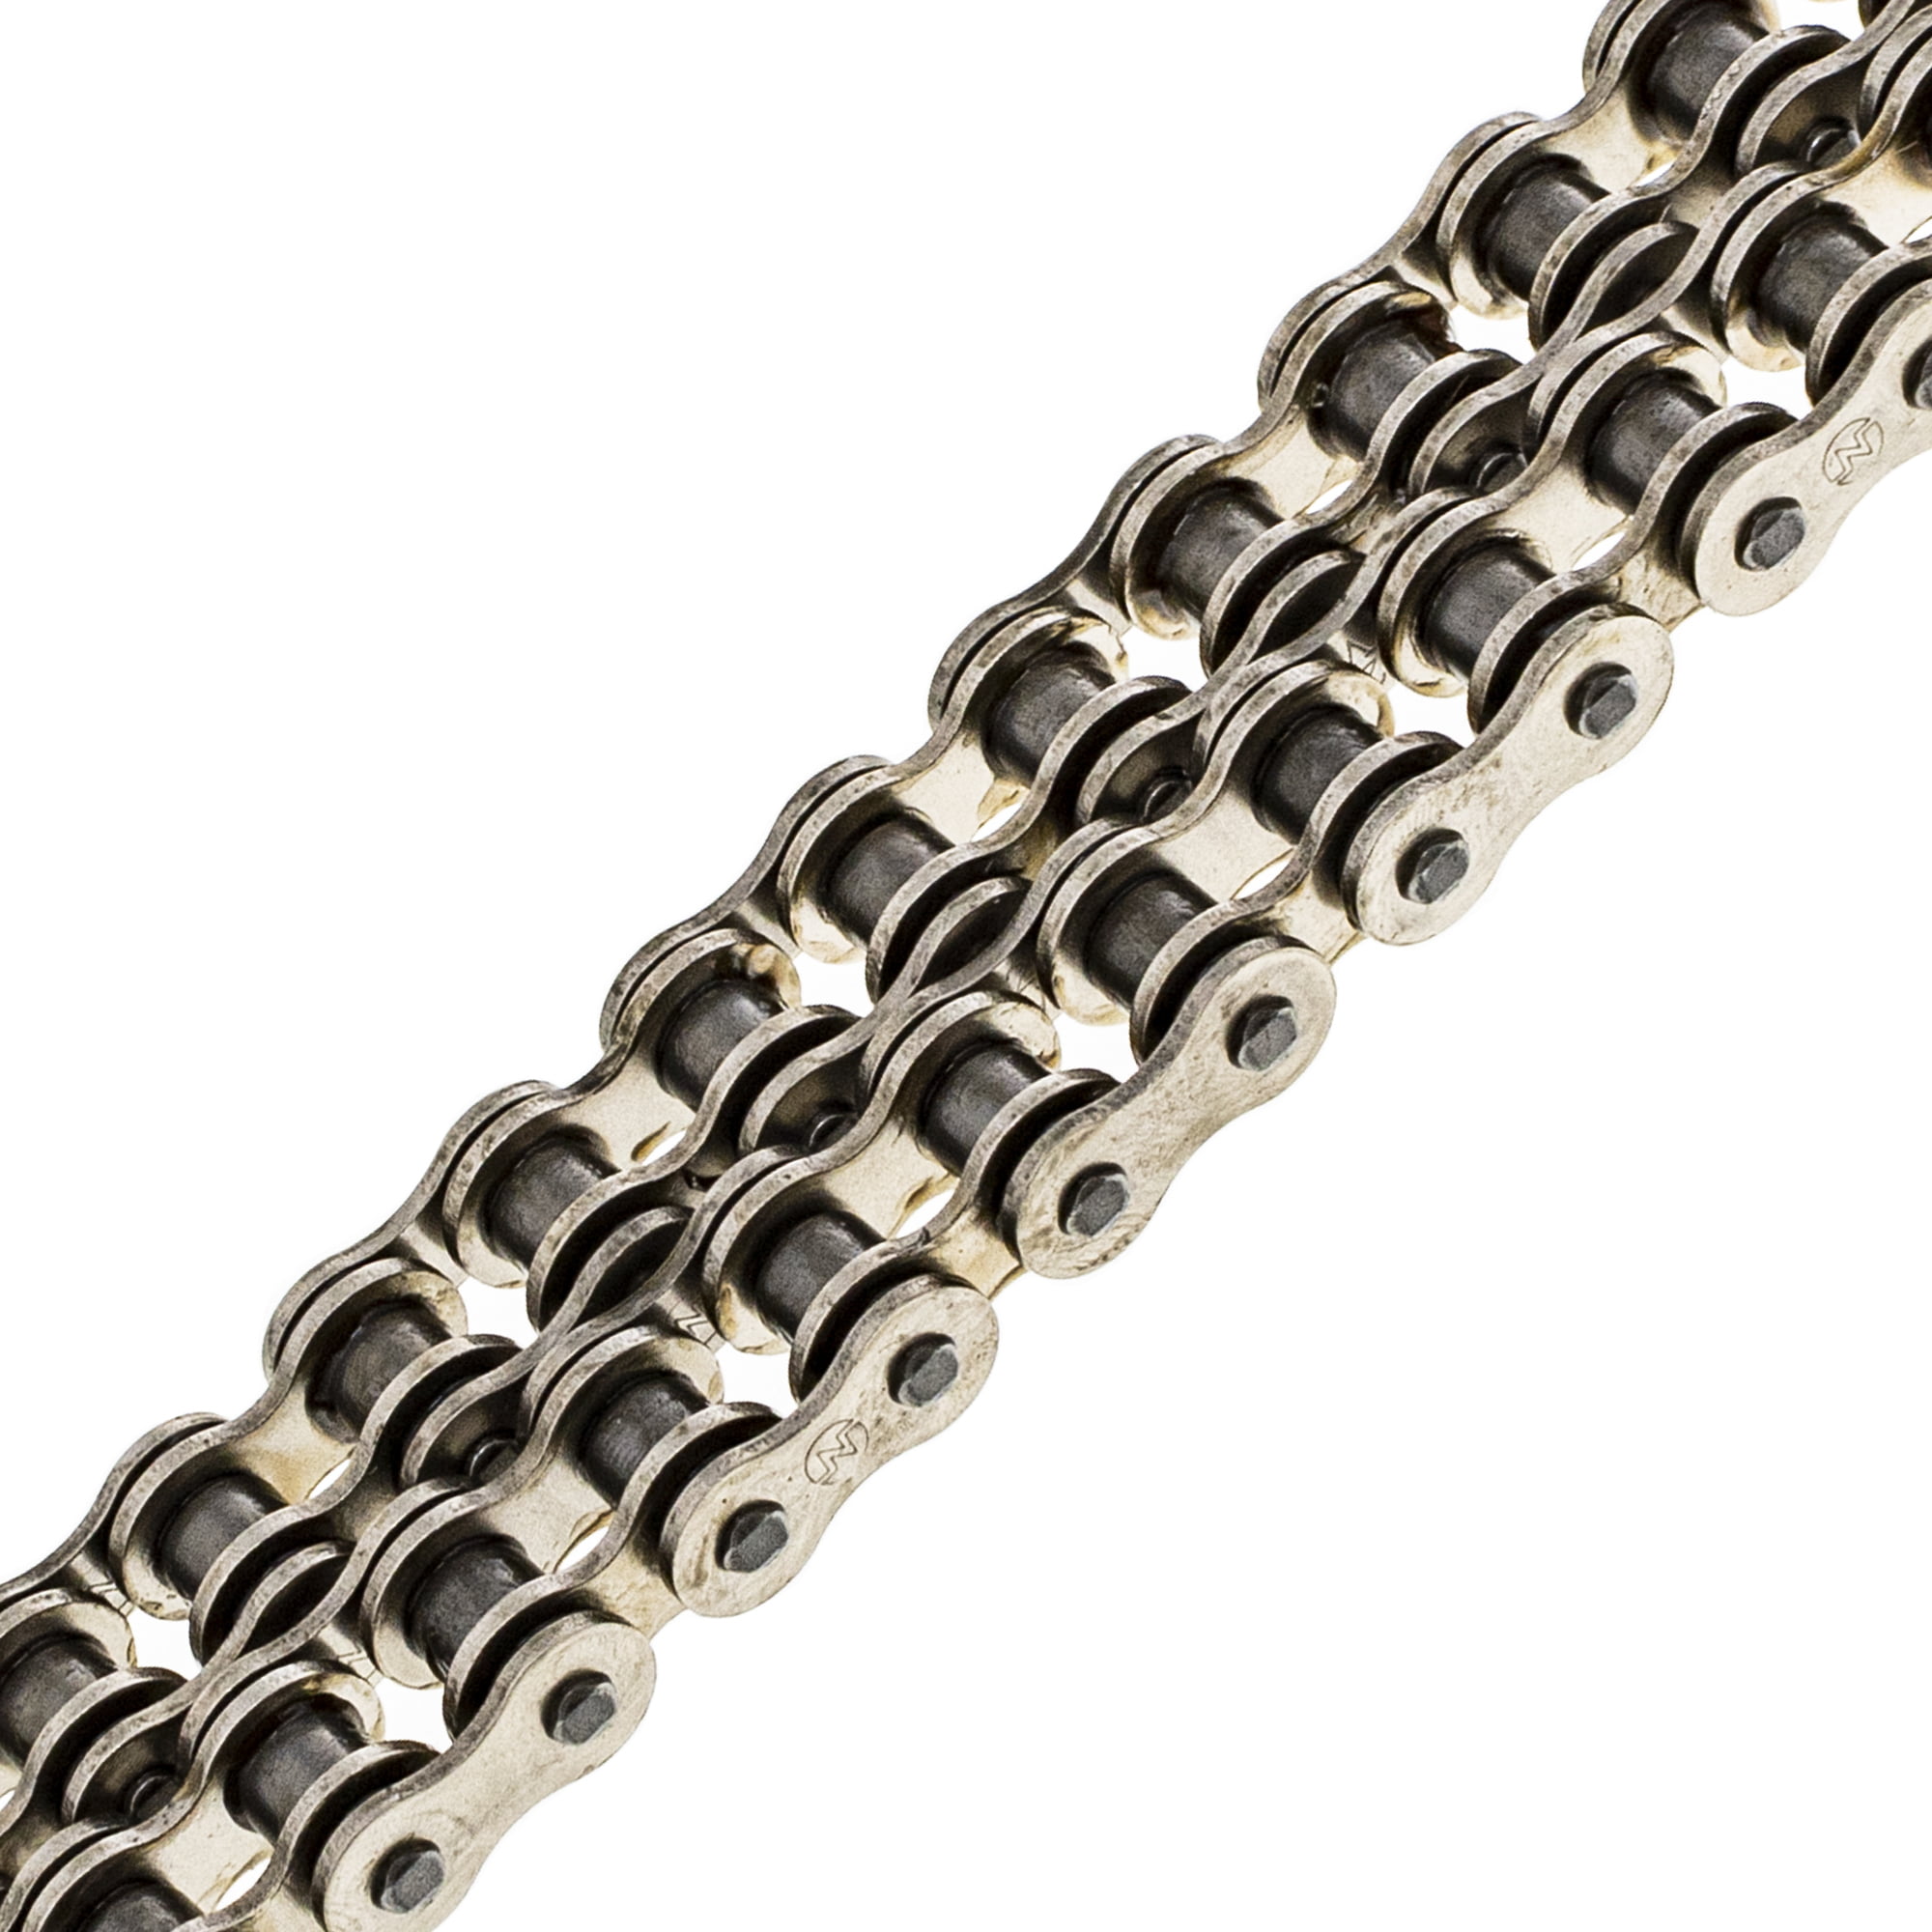 NICHE 420 Drive Chain 96 Links Standard Non O-Ring with Connecting Master Link 